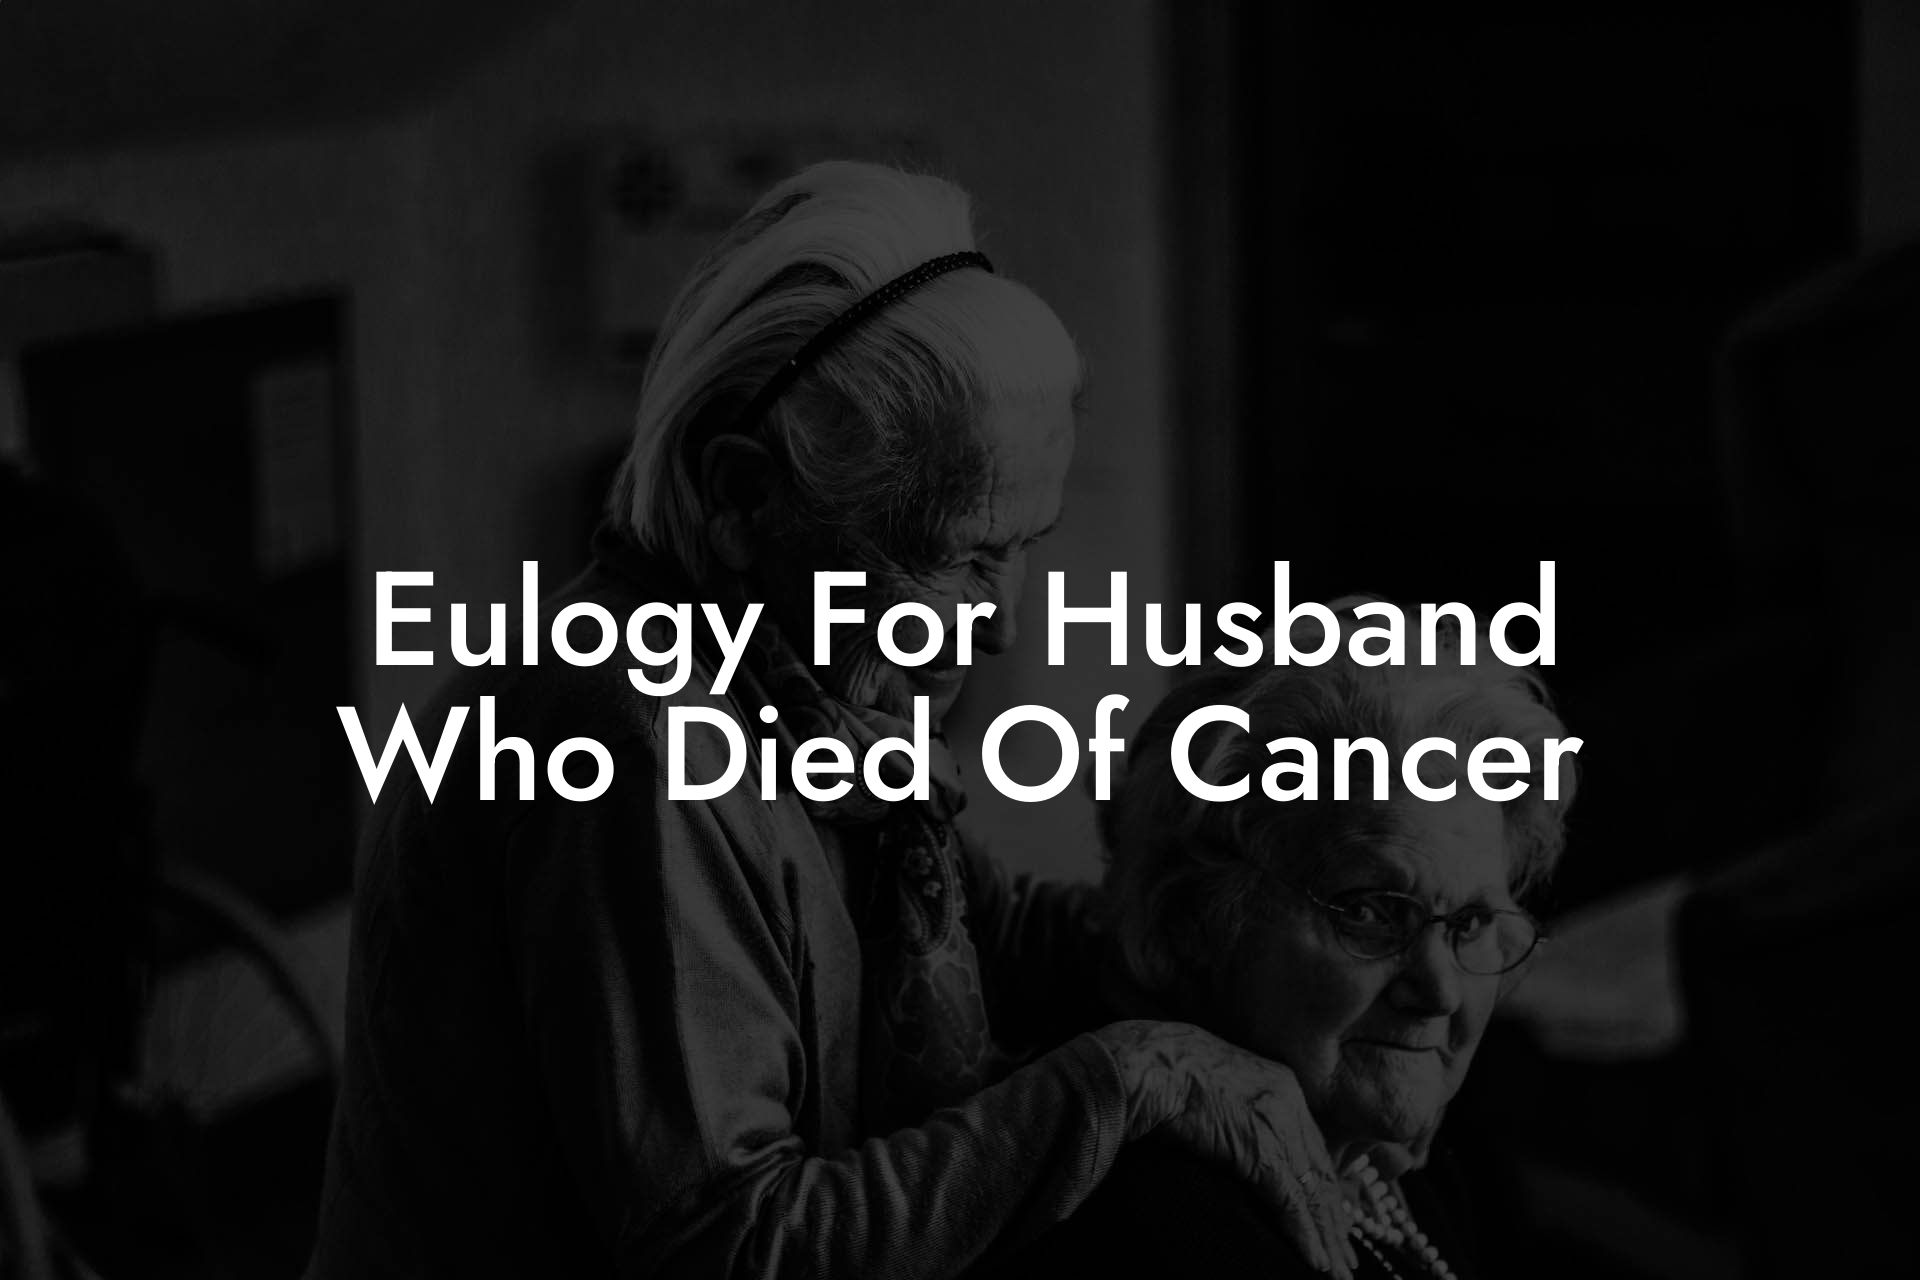 Eulogy For Husband Who Died Of Cancer